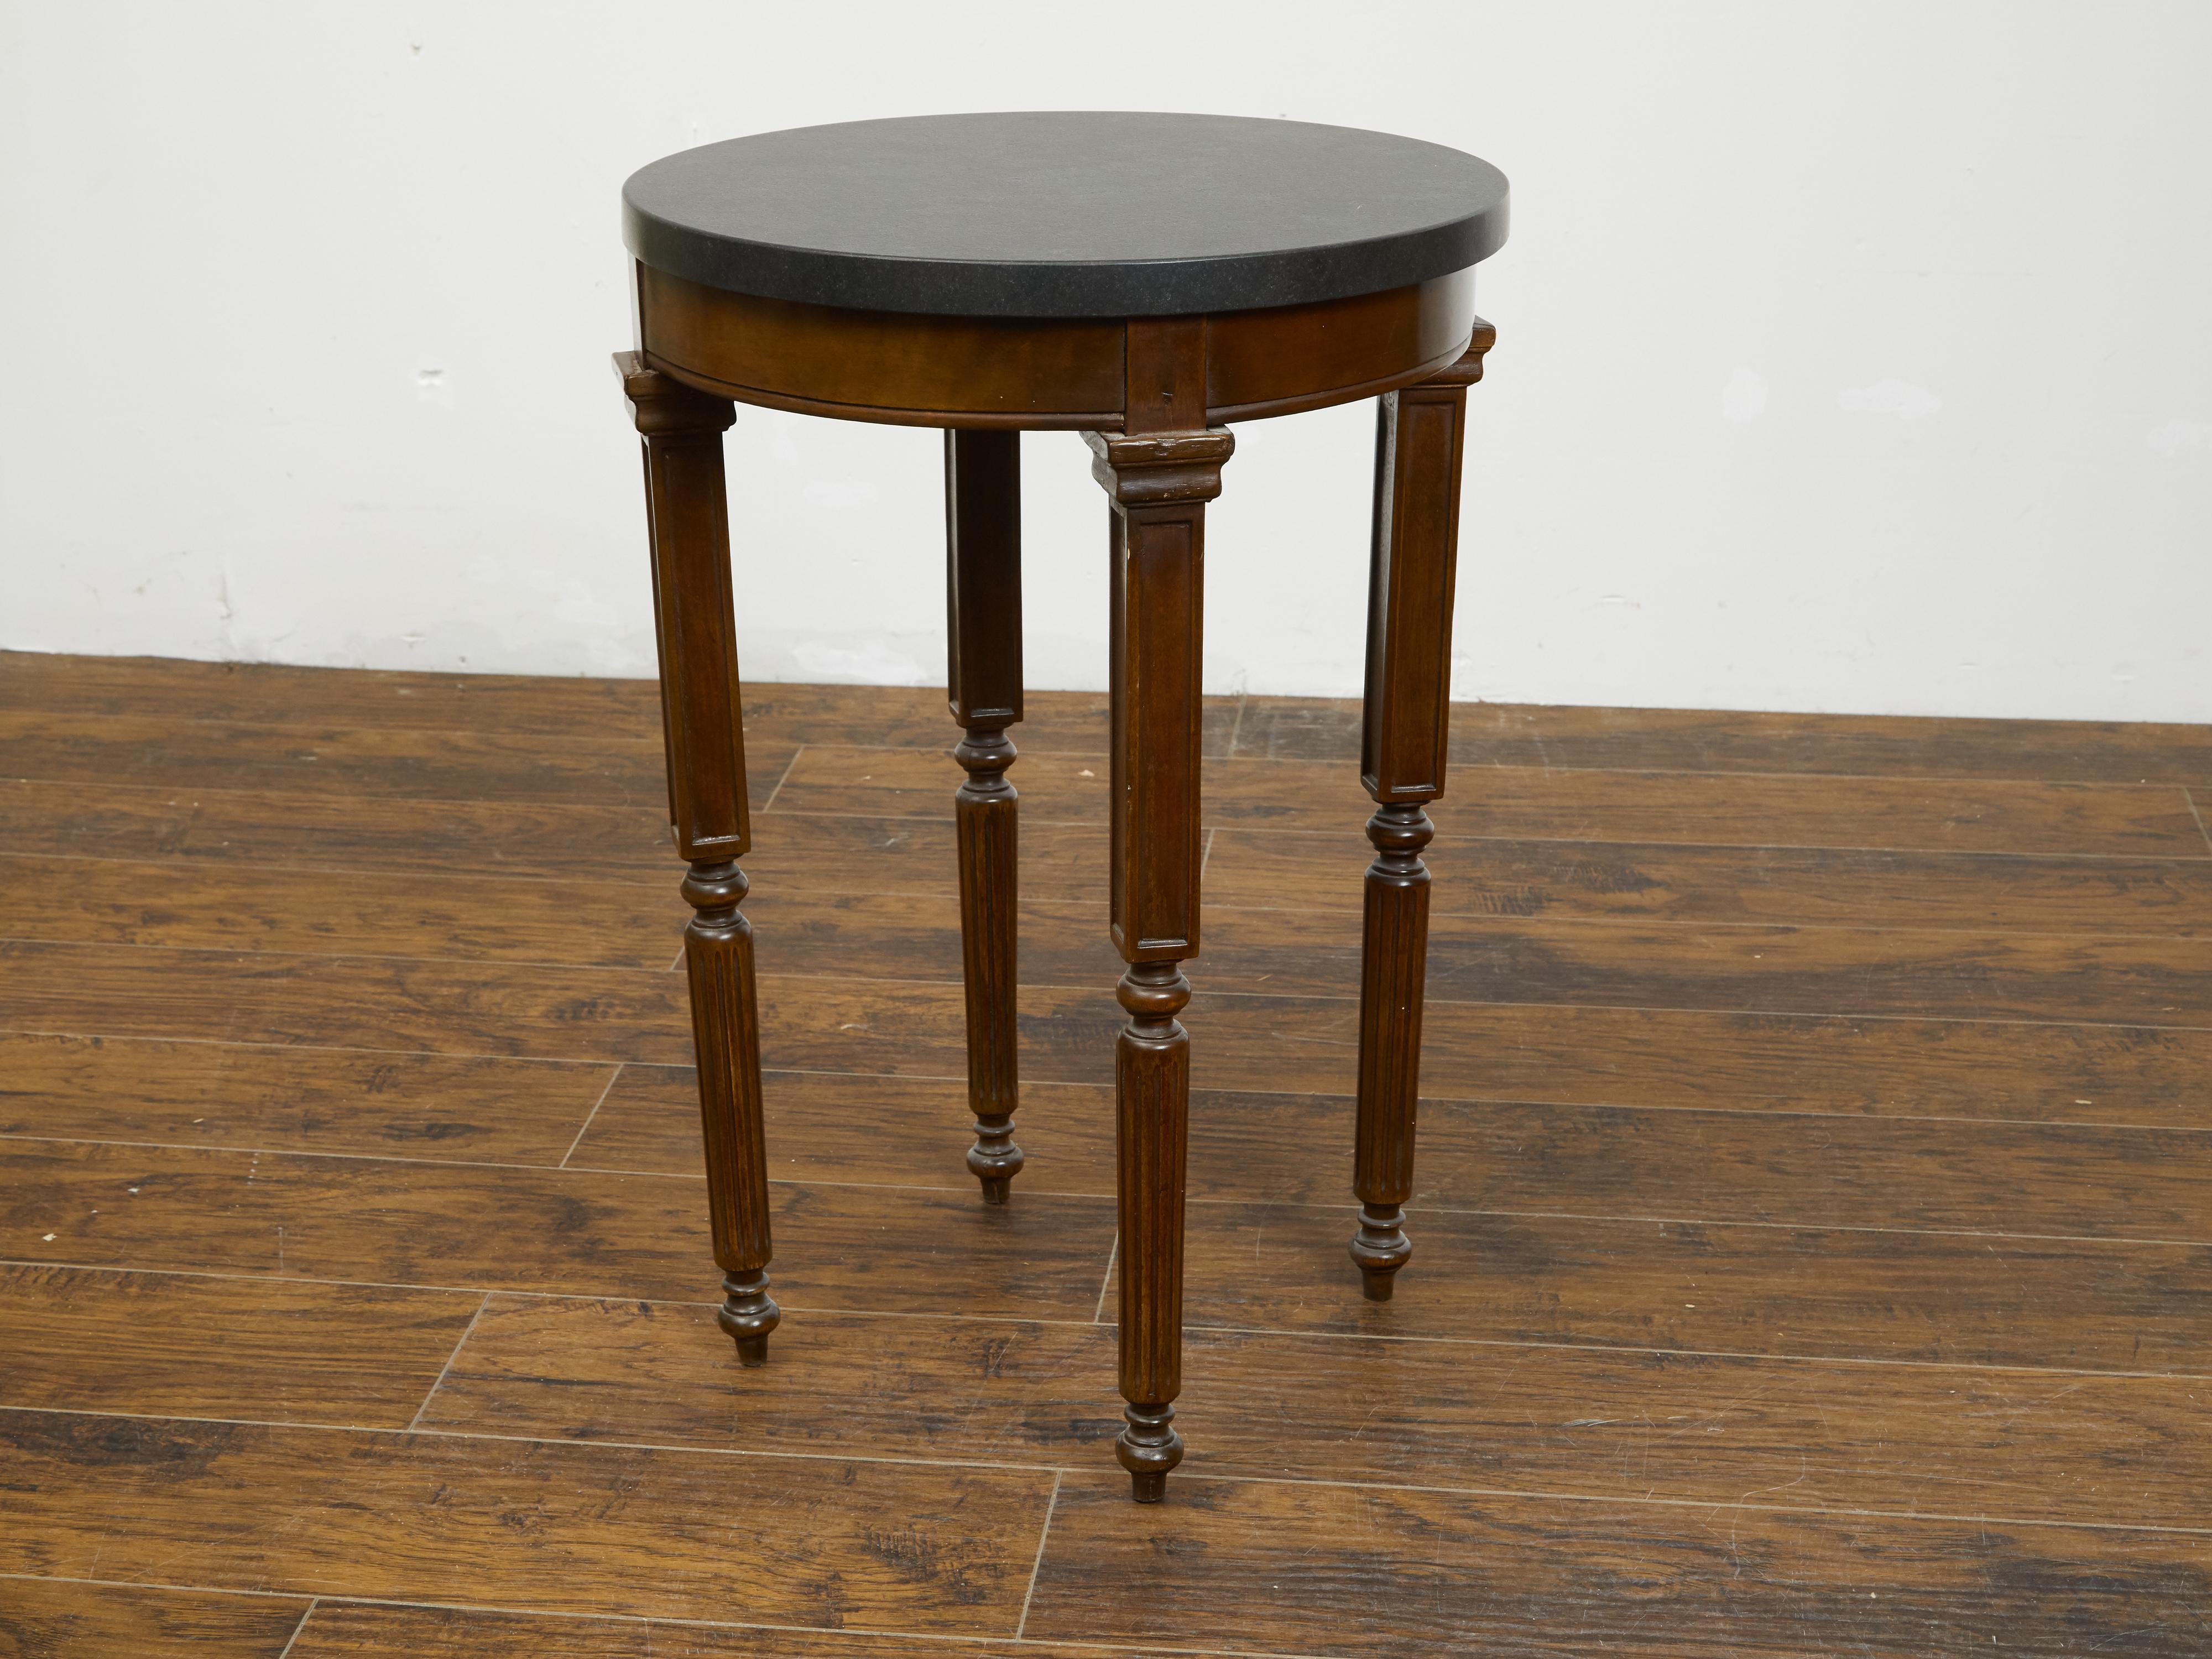 A French wooden guéridon table from the 19th century, with black marble top and unusual legs. Created in France during the 19th century, this guéridon table features a circular black marble top sitting above a simple apron. The table is raised on